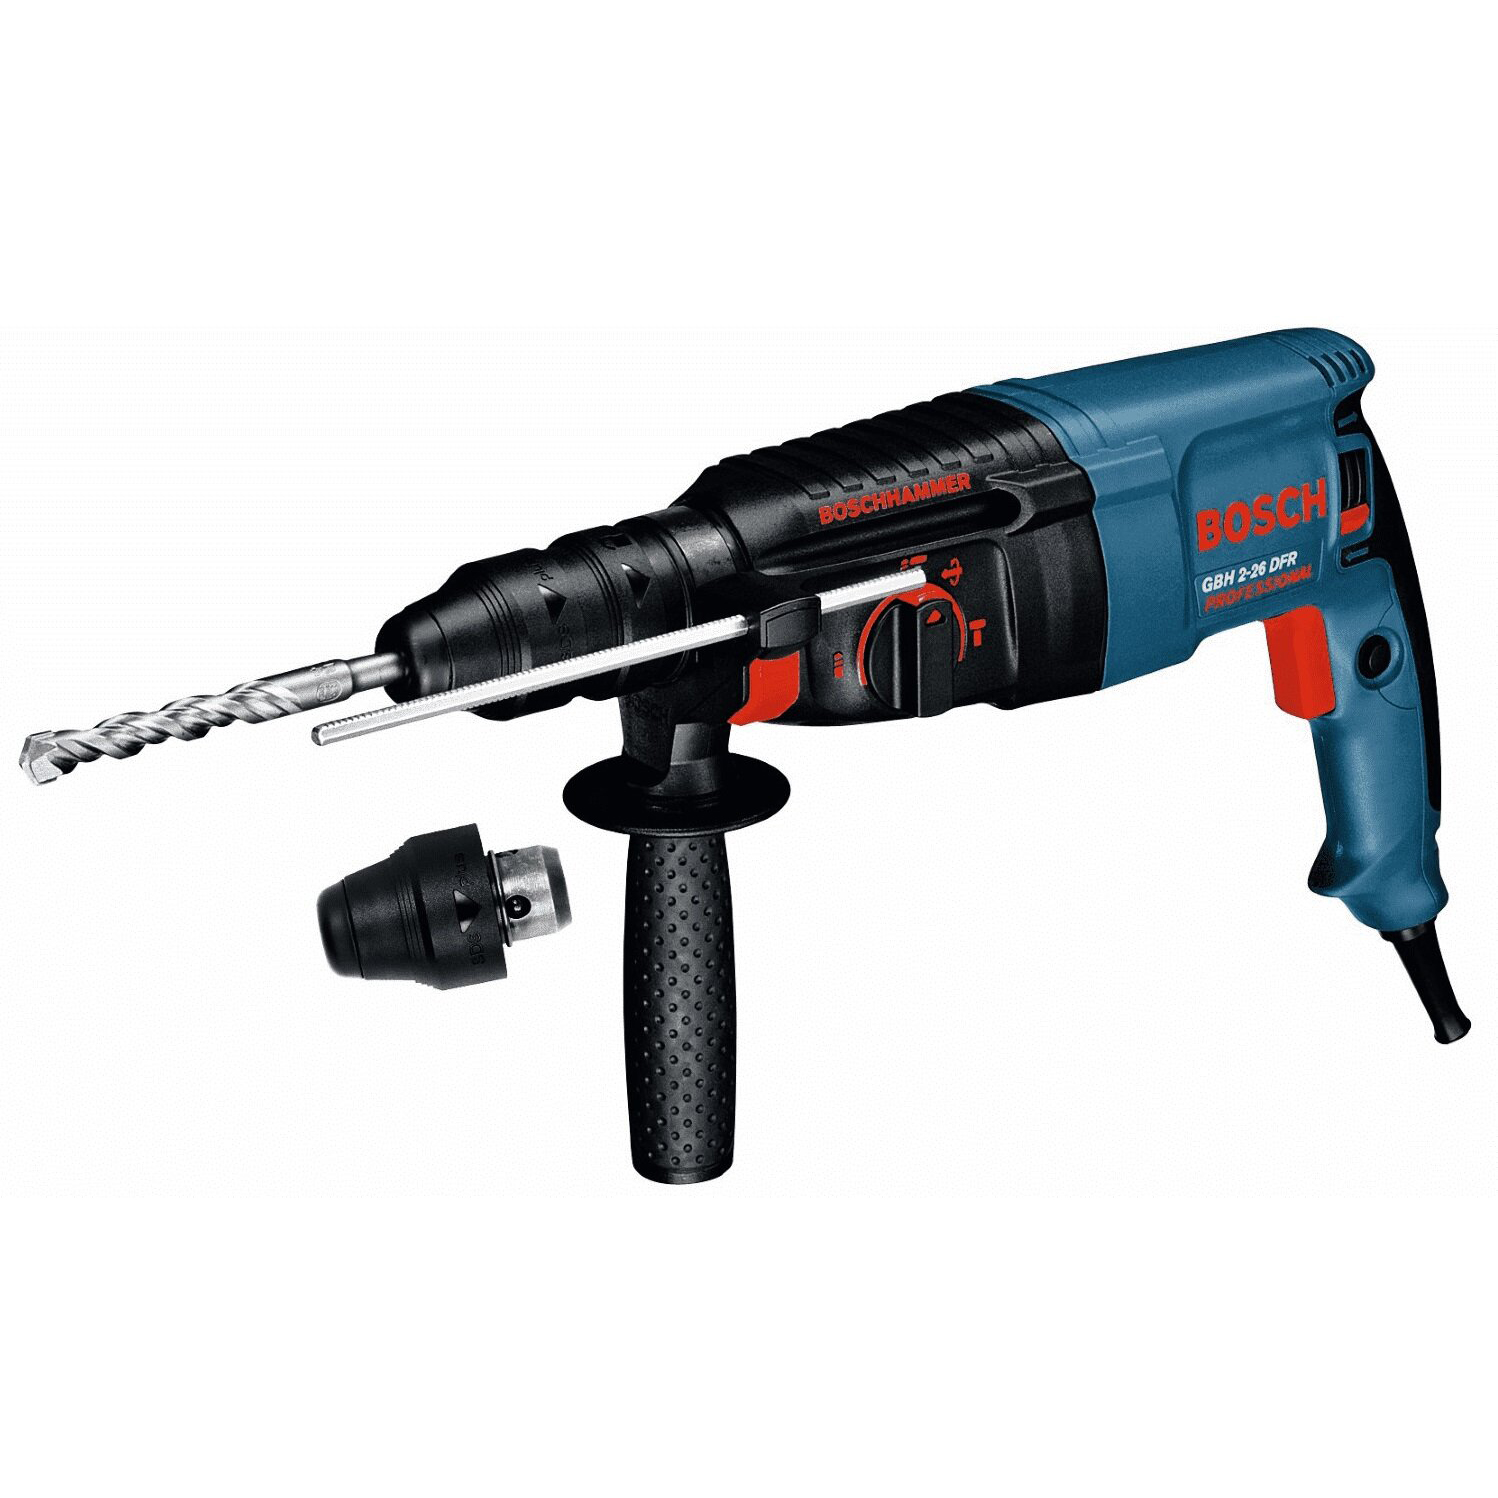 Перфоратор BOSCH Professional GBH 2-26 DFR 0611254768 rotary hammer striker with o ring replace for bosch gbh 2 26dre 2 26ddf 2 26f rh 2 26 gbh36vf li gbh 2 24dre rotary hammer parts